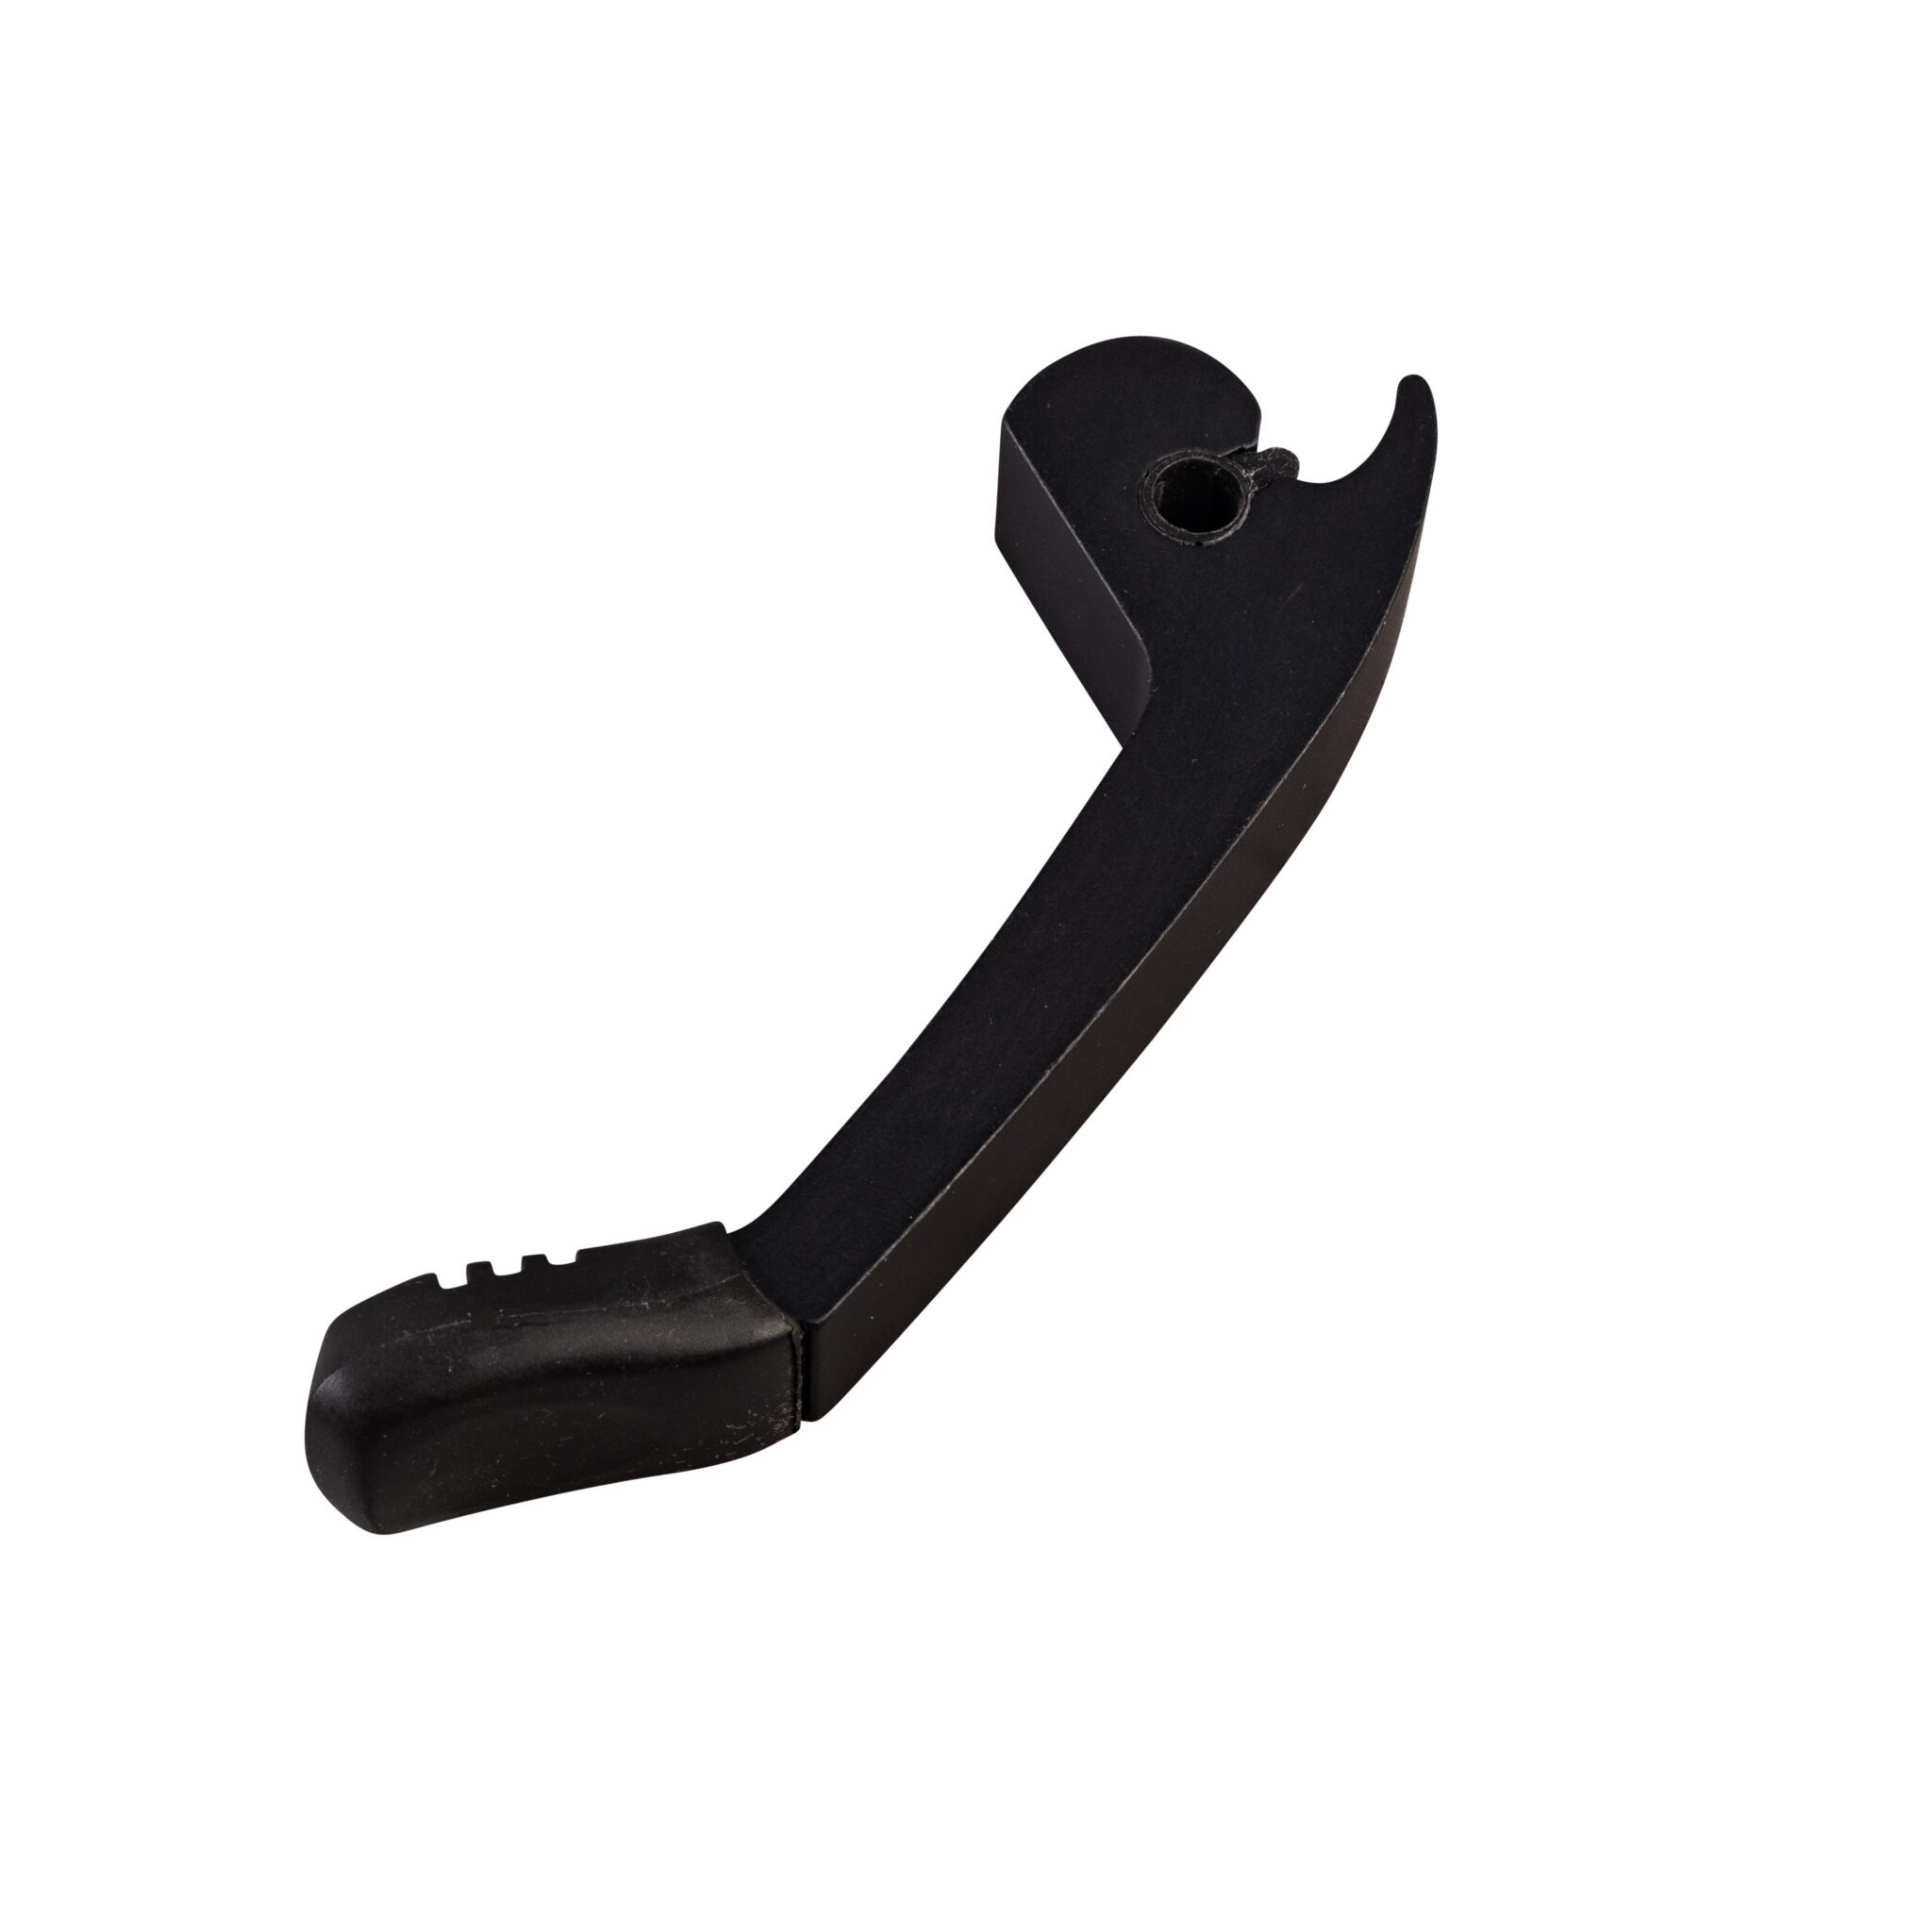 Spinlock replacement lever for XTS trap stopper